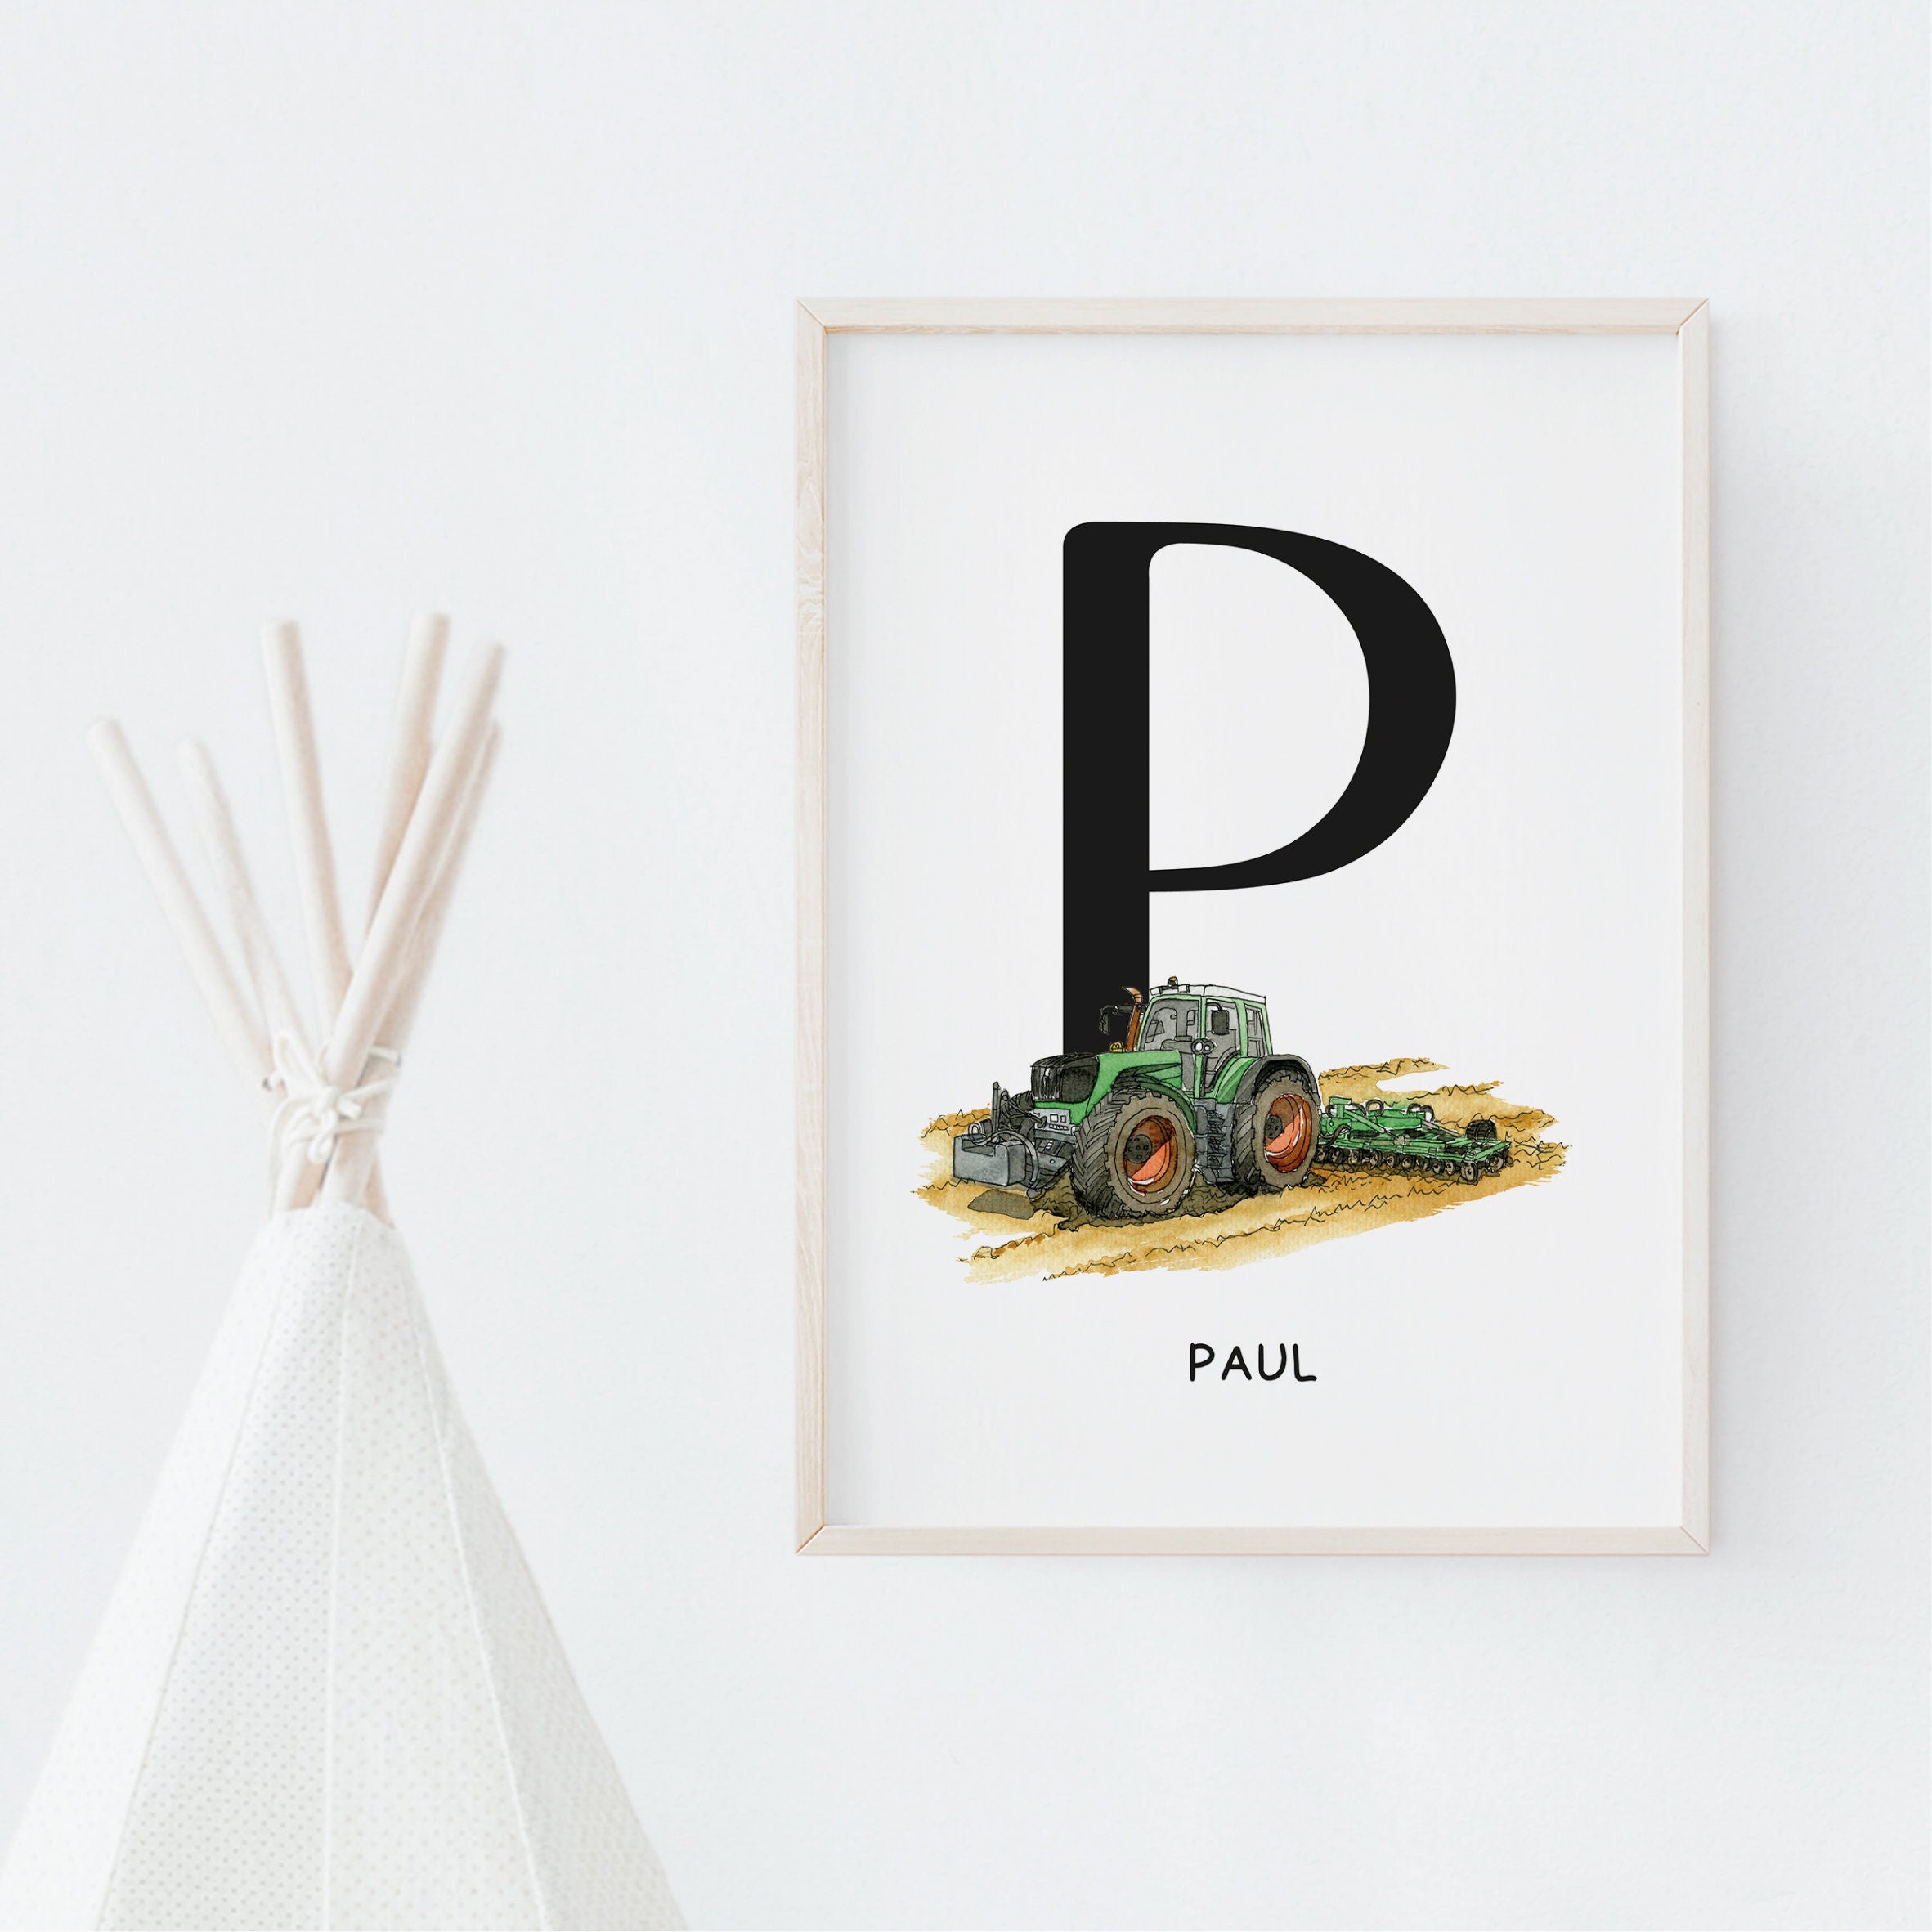 Vehicle Poster - Tractor | Personalized poster for the children's room